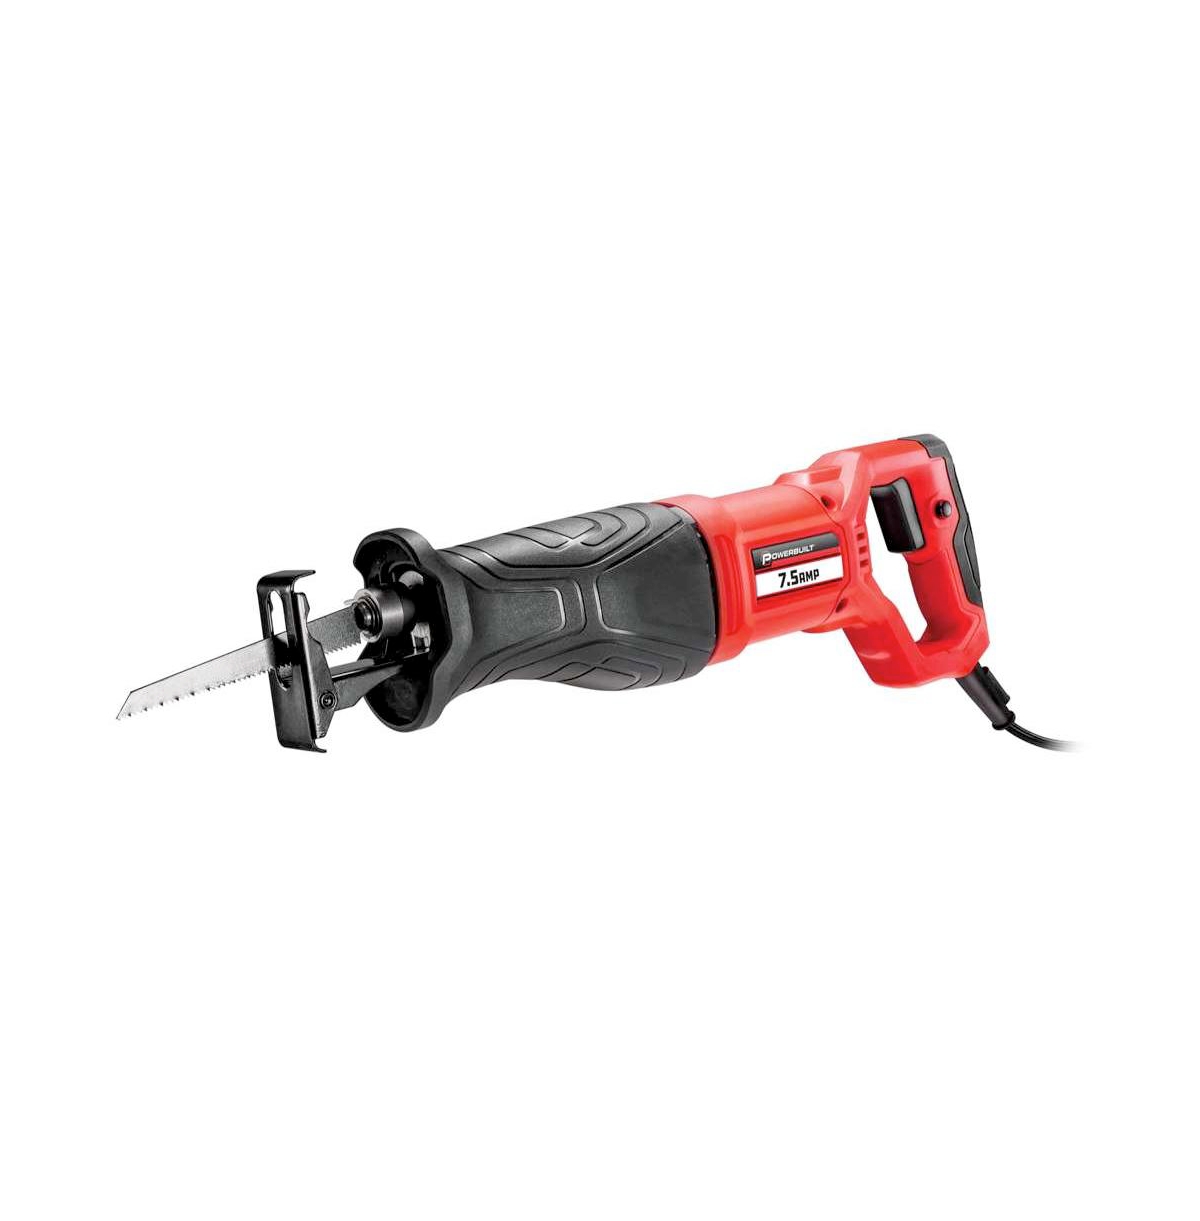 6 Inch 7.5A Reciprocating Saw with 2 Blades - Red